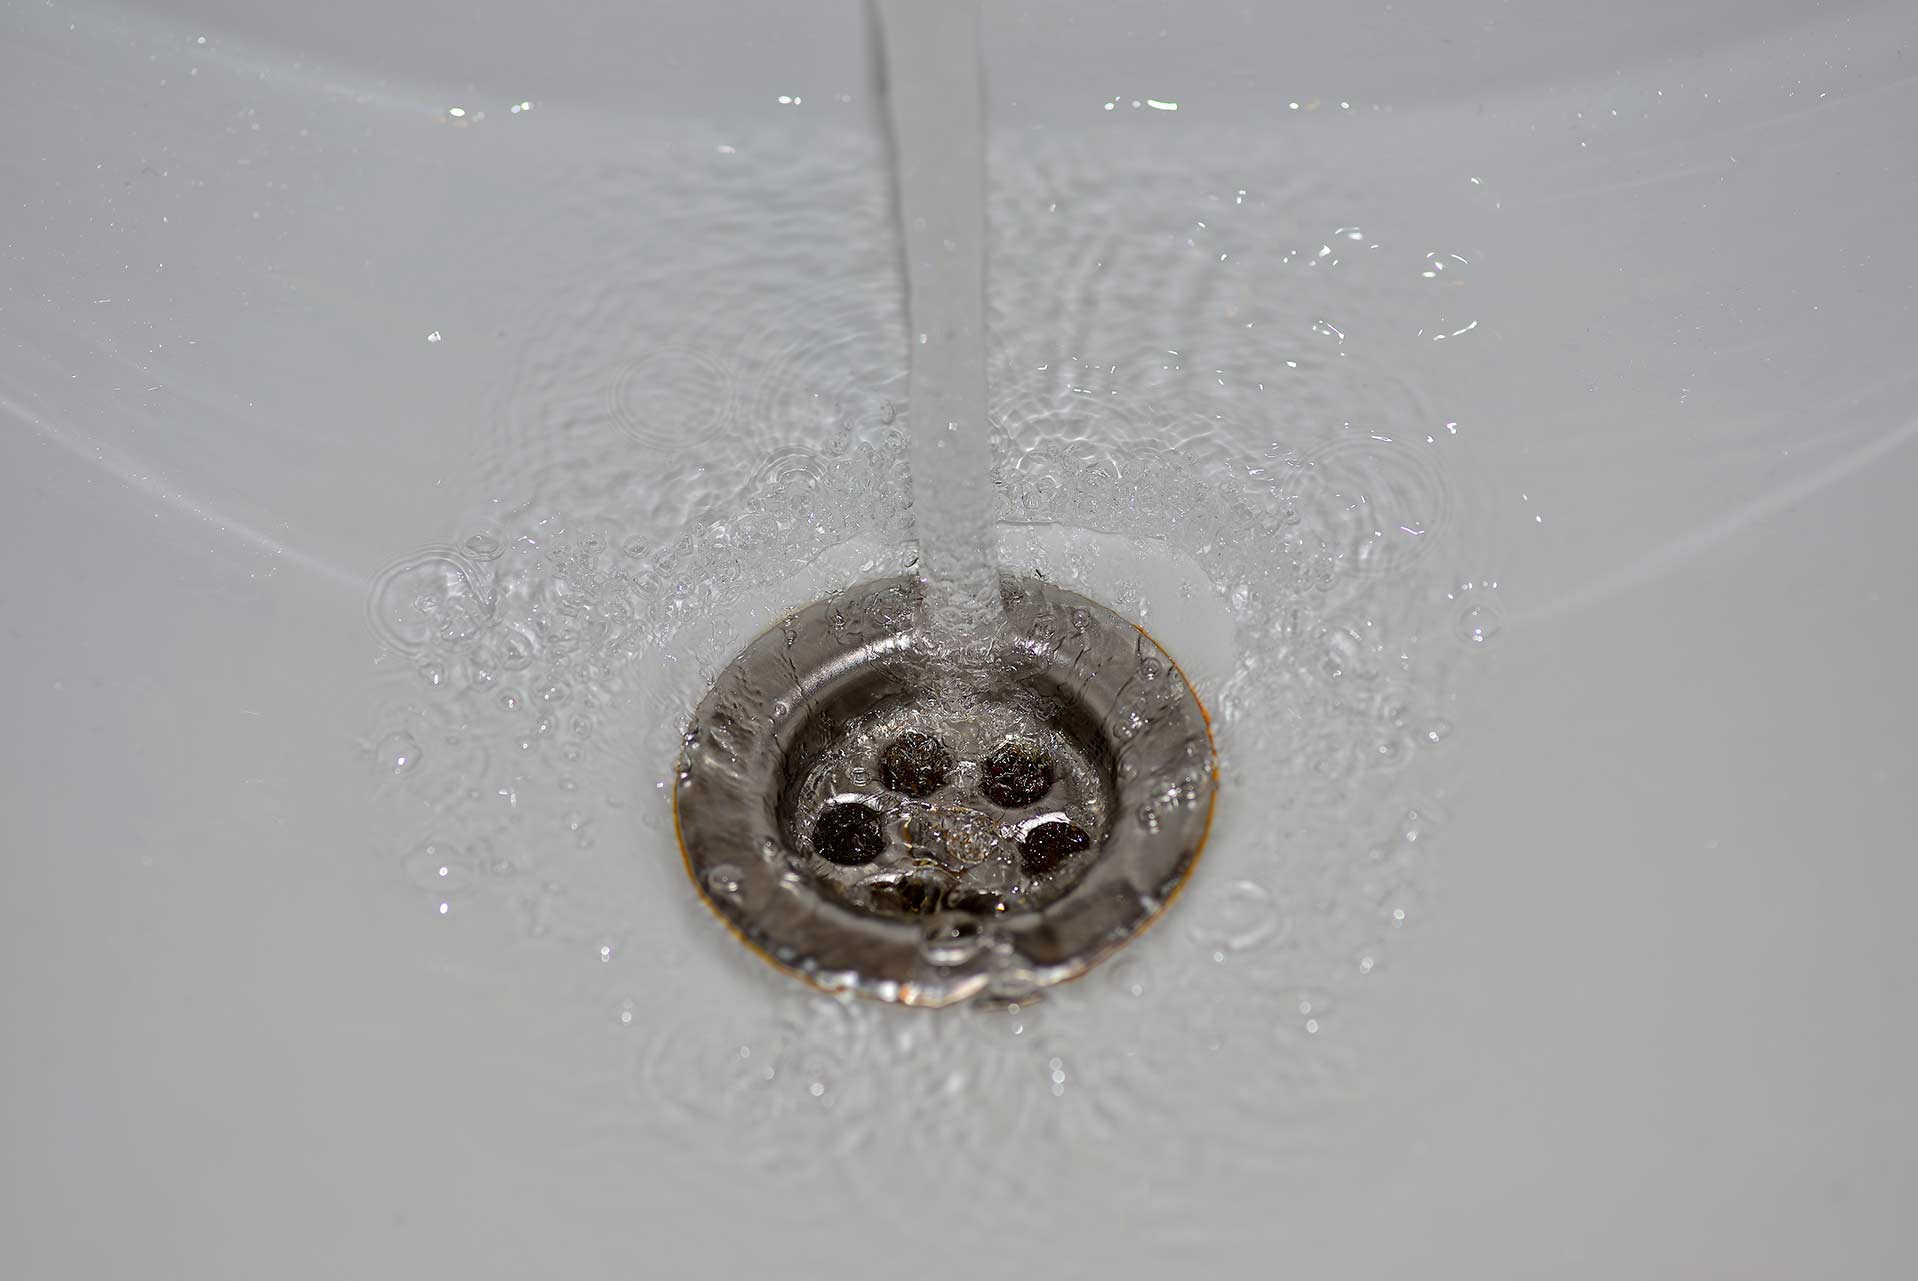 A2B Drains provides services to unblock blocked sinks and drains for properties in Bermondsey.